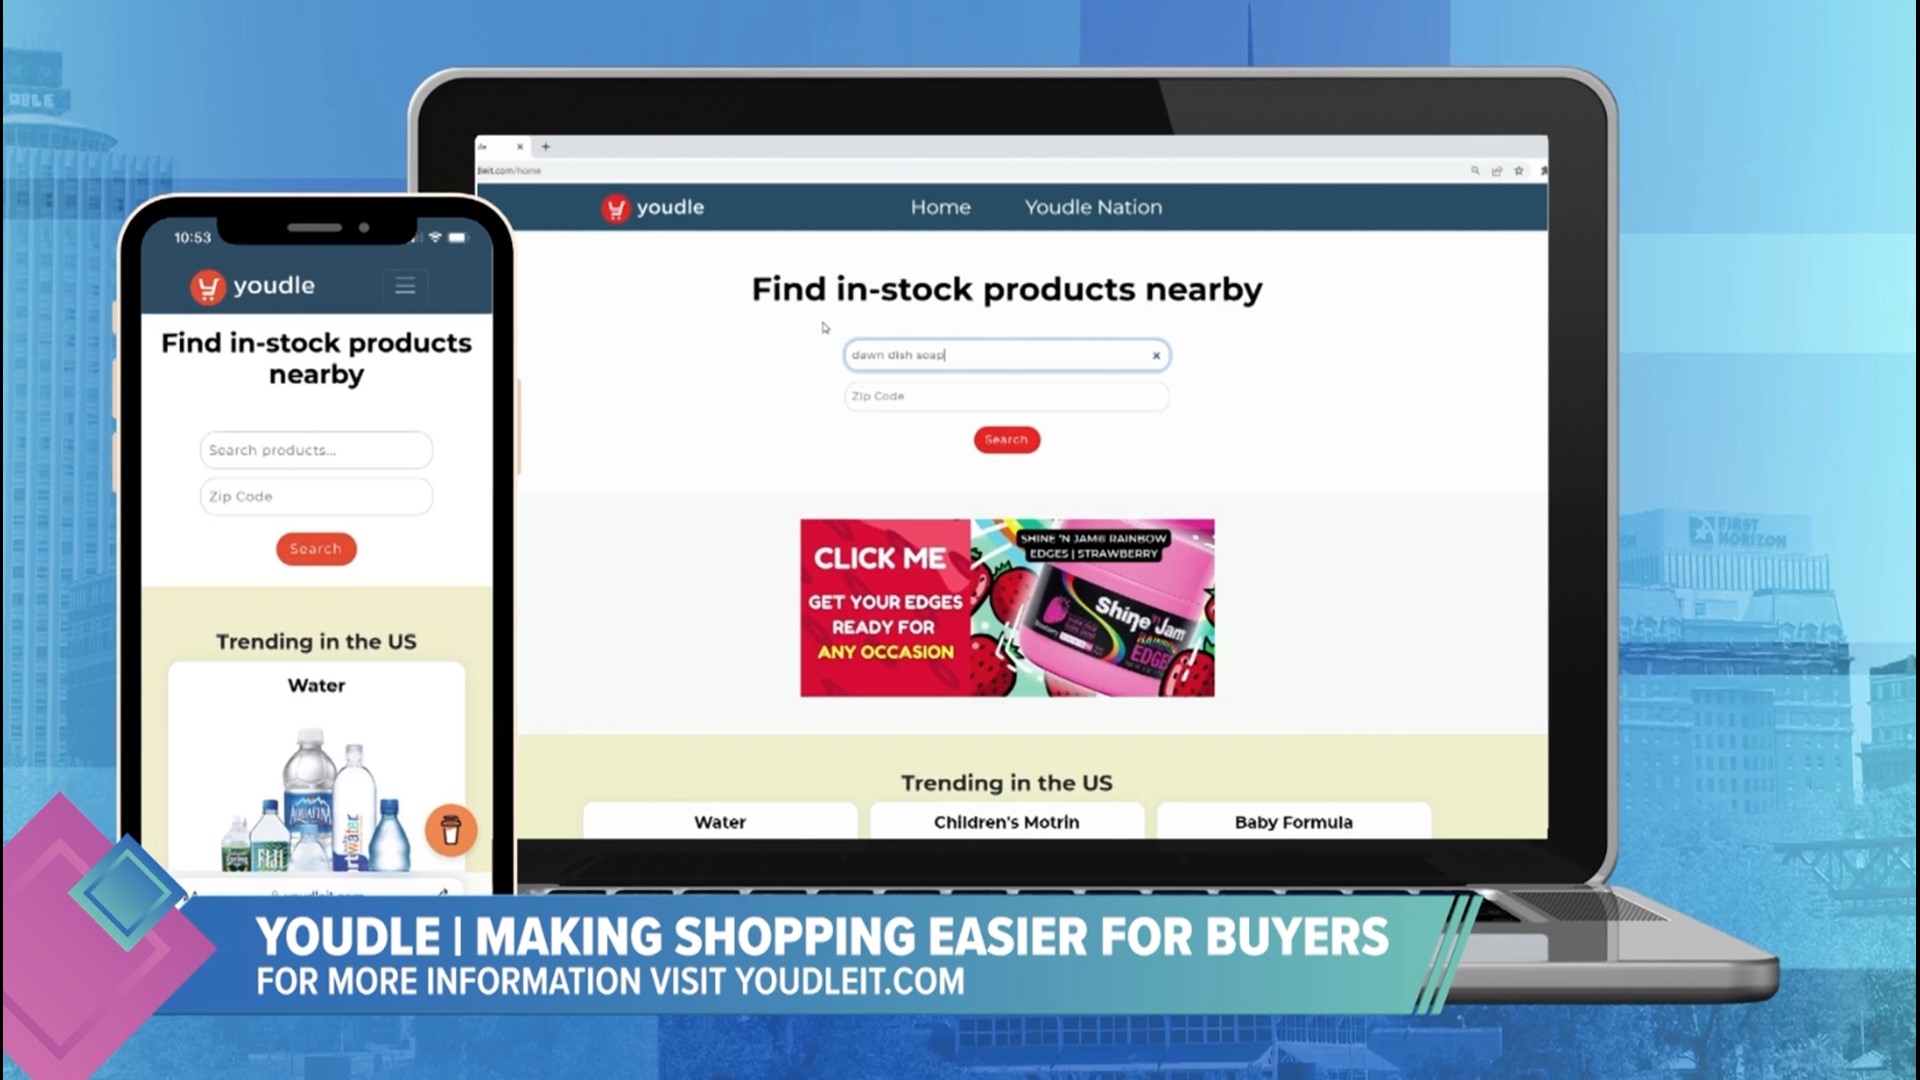 Can't find a product? Need a better bargain? Youdle has you covered! With its mobile-friendly website, you can search for the best deal and availability.